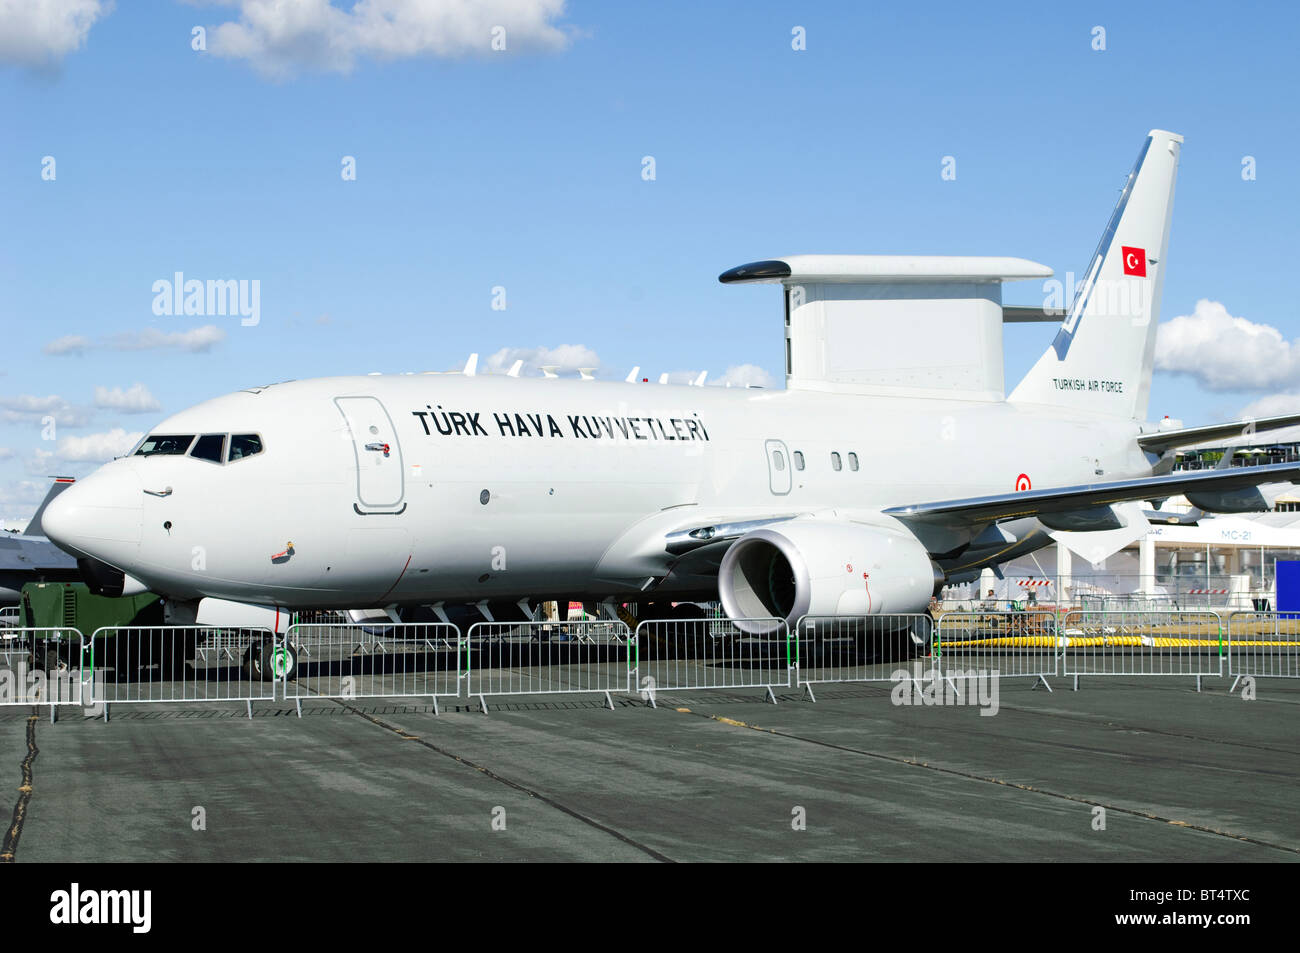 Boeing 737-7ES Peace Eagle operated by the Turkish Air Force on static display at Farnborough Airshow Stock Photo